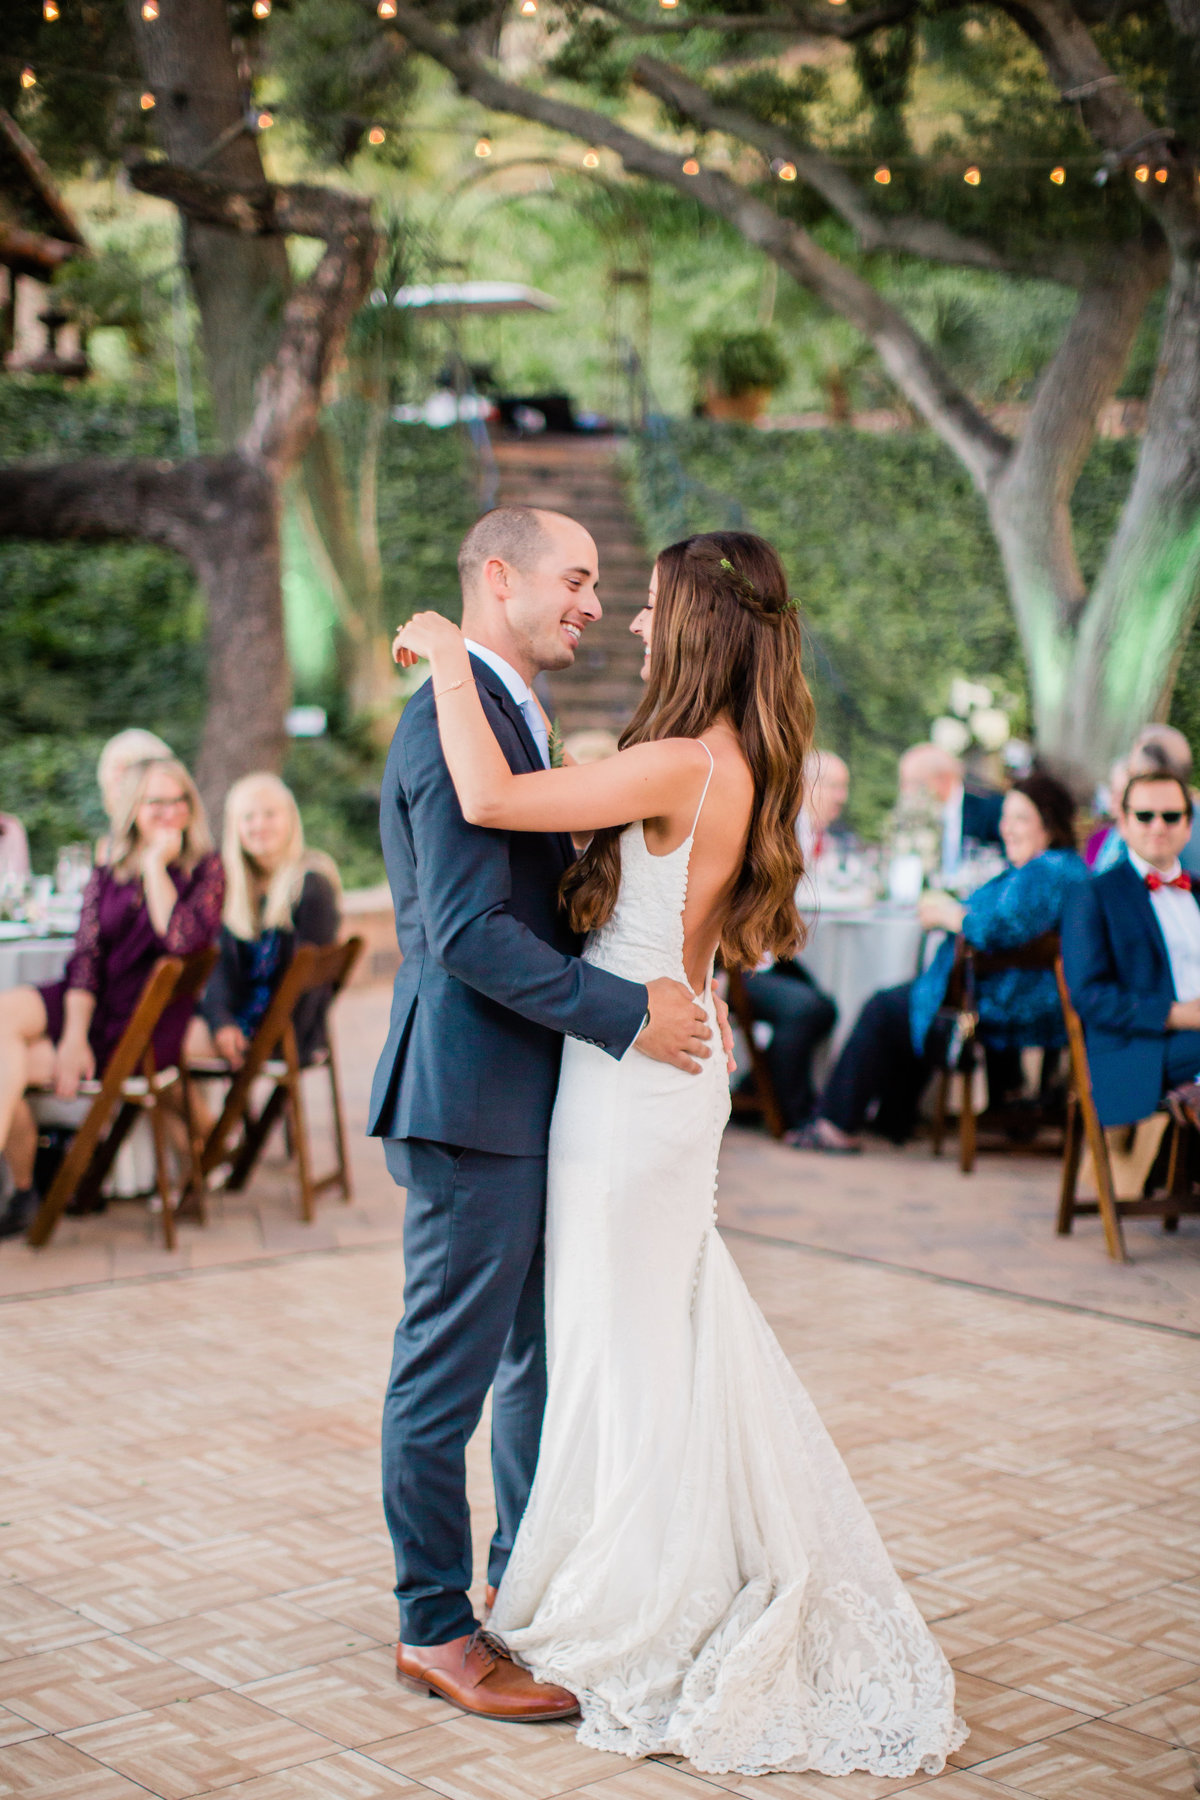 Paige & Thomas are Married| Circle Oak Ranch Wedding | Katie Schoepflin Photography740